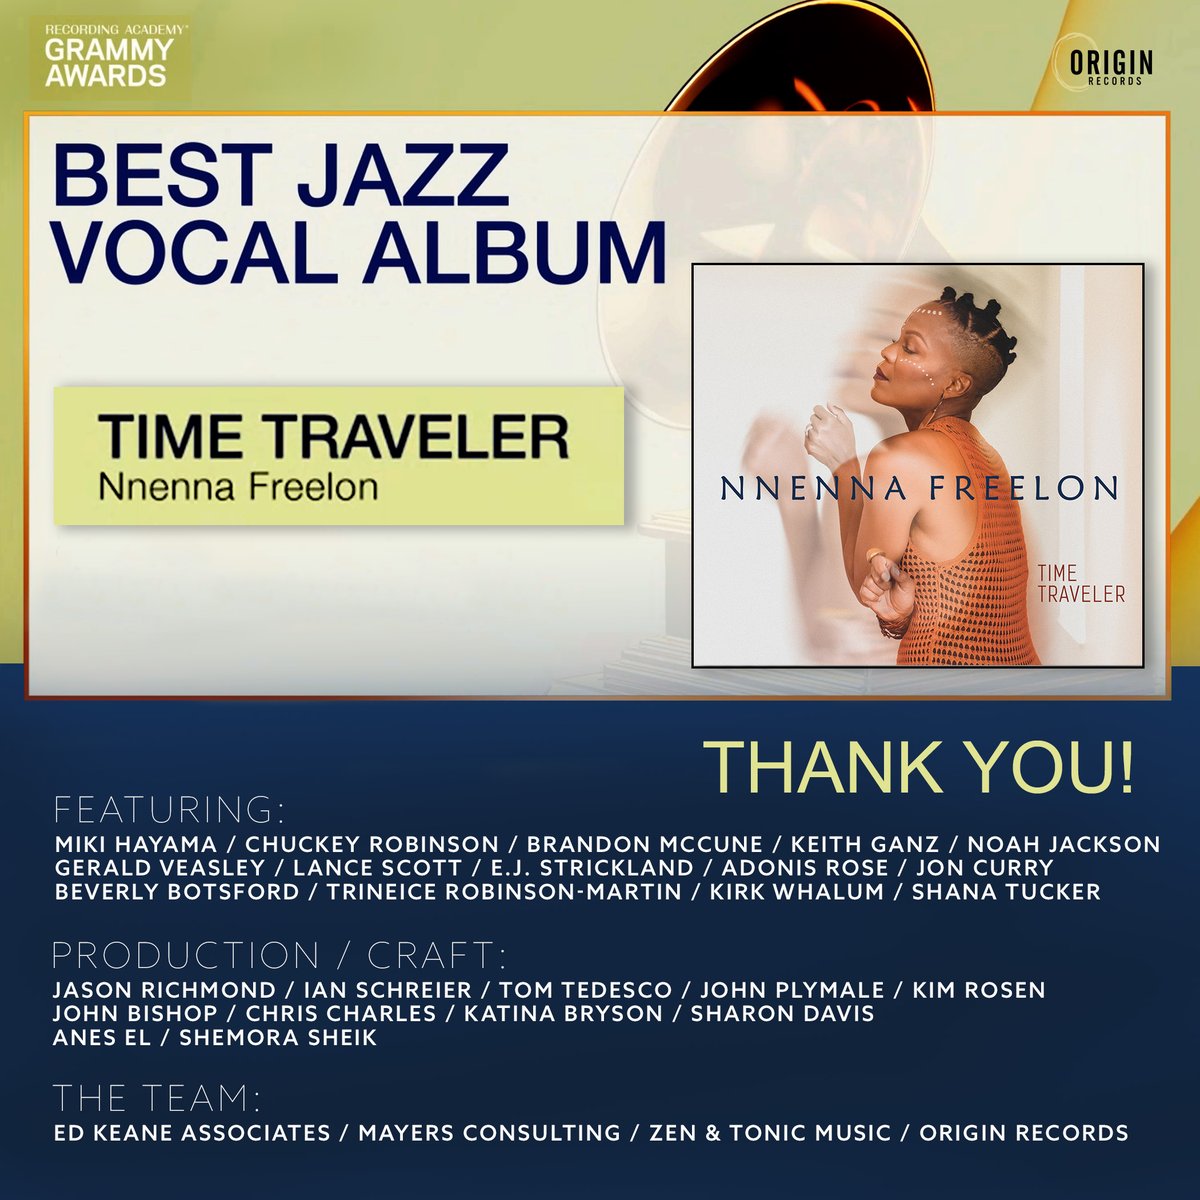 Grammy voting NOW! Thanks to all for the amazing success of Nnenna Freelon's Time Traveler! #jazz #GRAMMYs #vocaljazz @OfficialNnenna